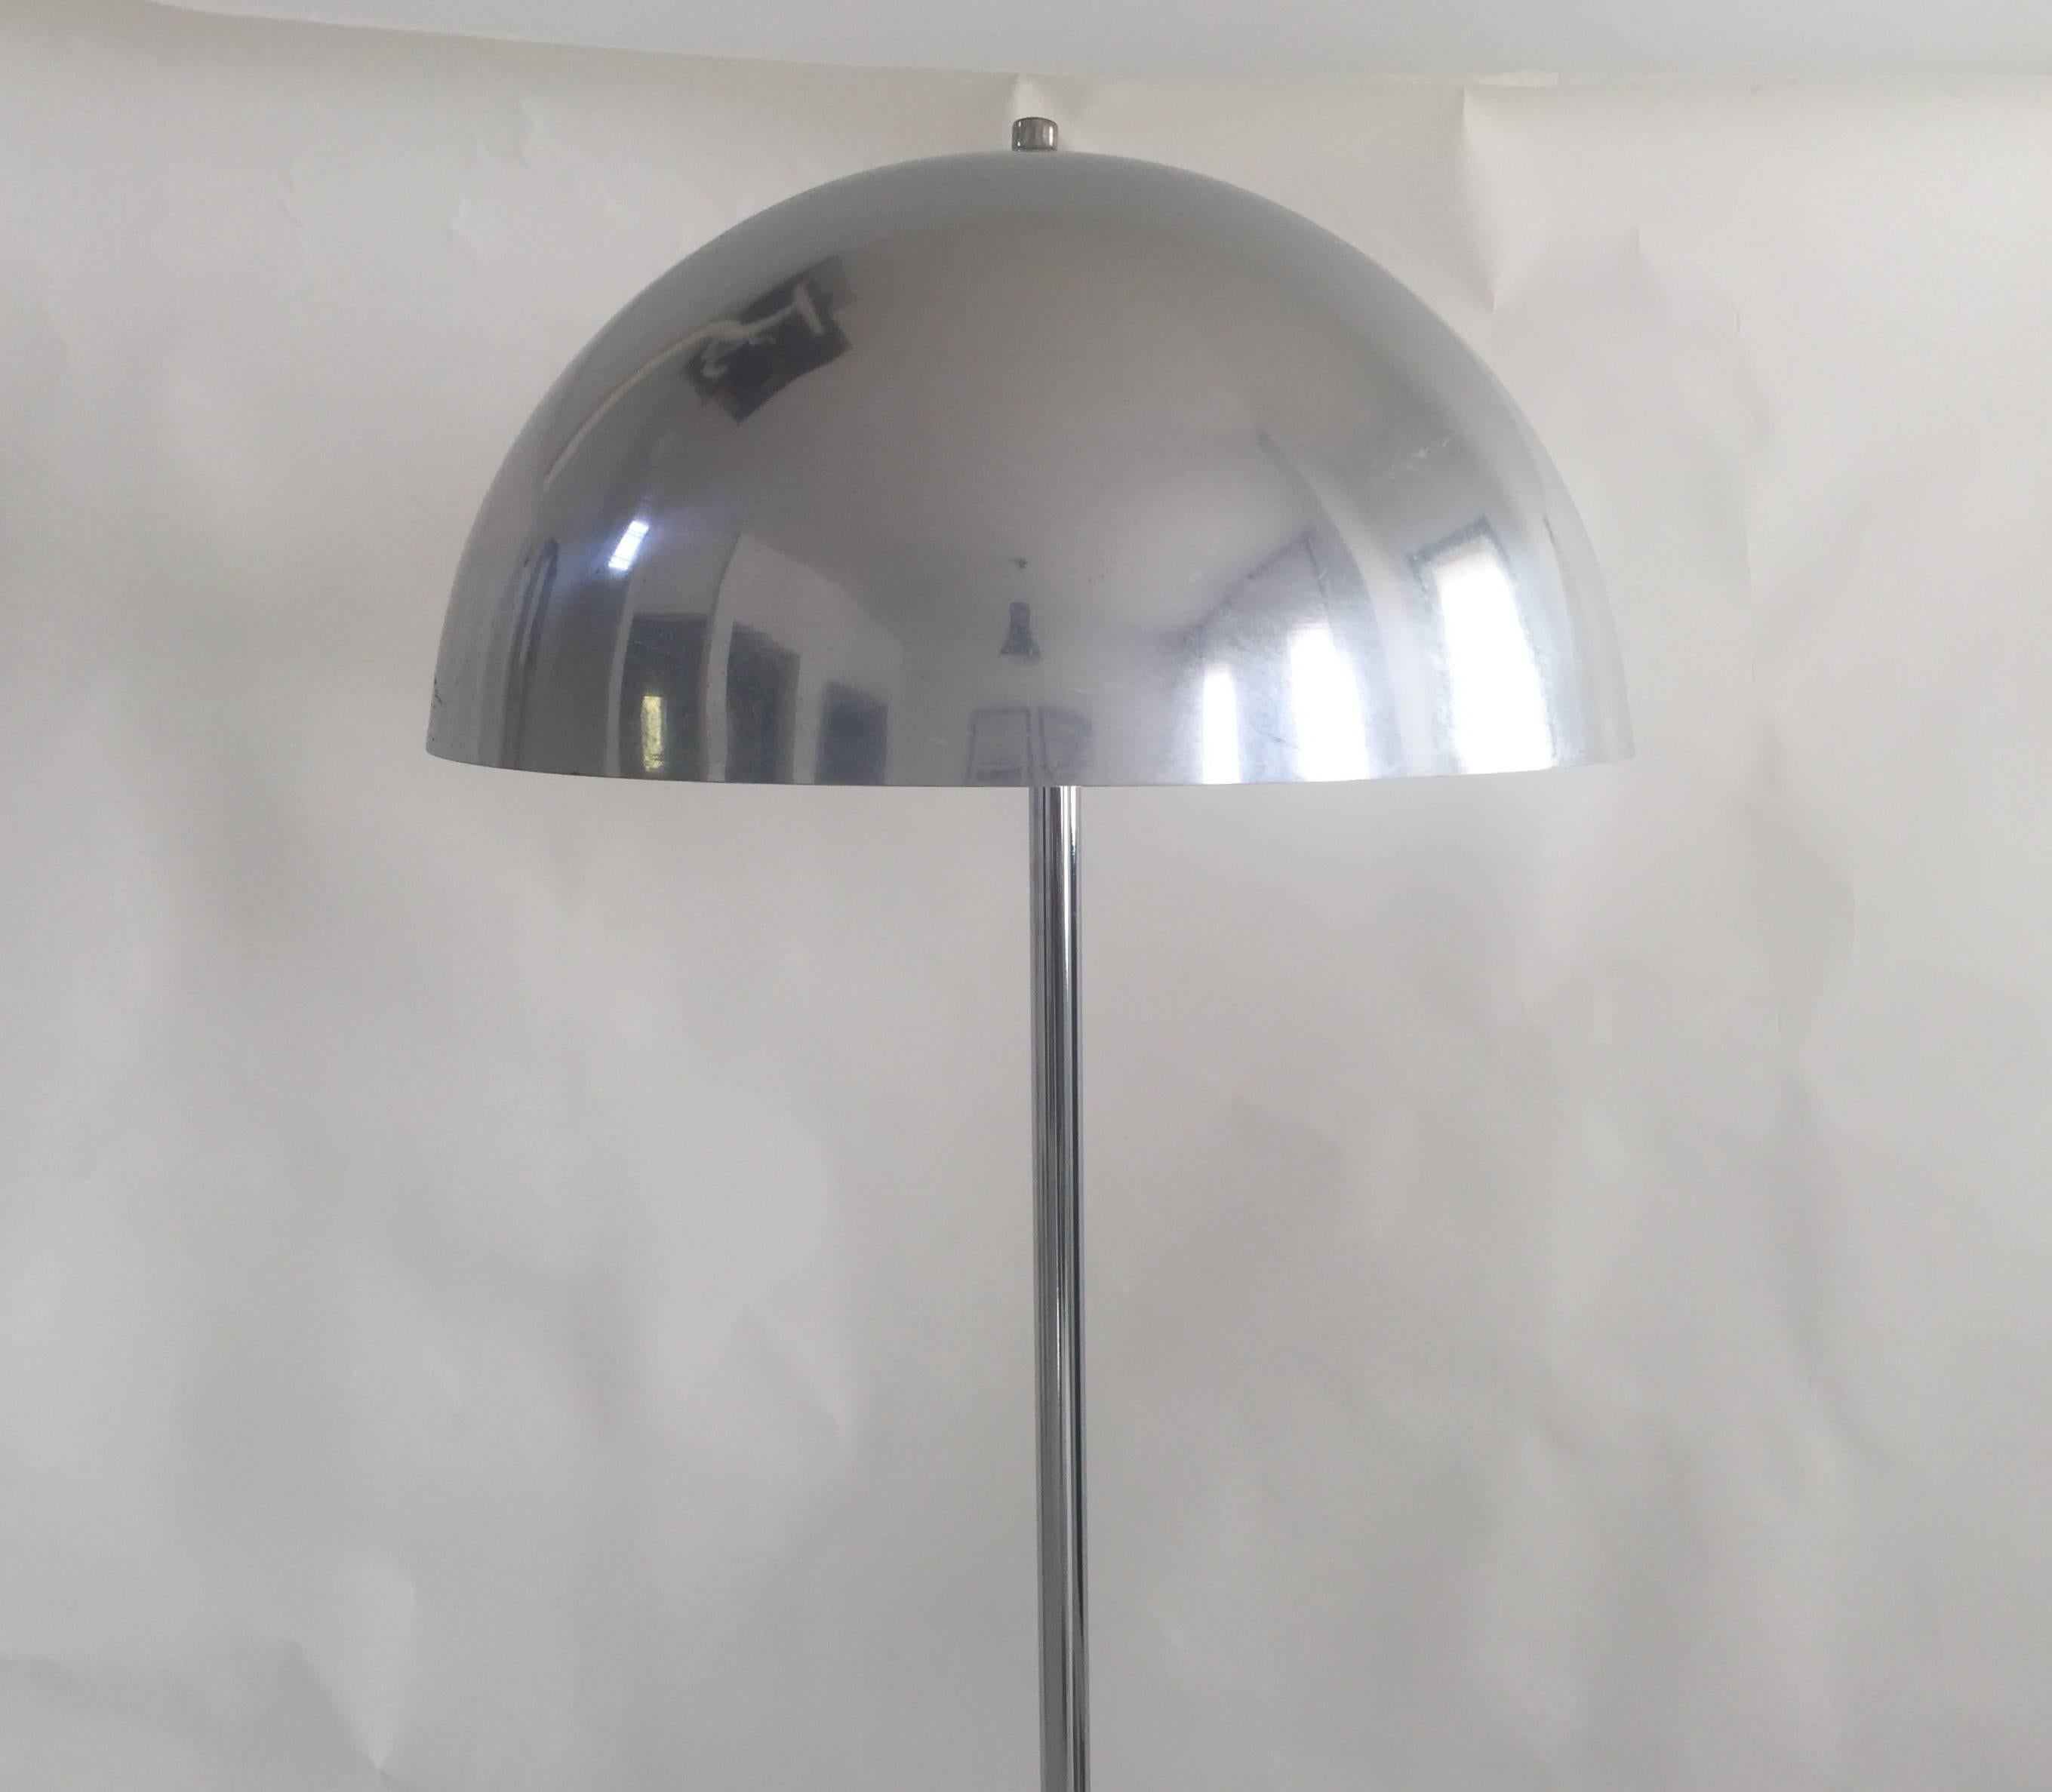 Modernist polished chrome floor lamp with matching shade, USA, circa 1970. In the style of Robert Sonneman. Takes one standard U.S. bulb, 100 watts max.

Dimensions: 
Height 56 inches
Shade height 9 inches
Shade width 16 inches
Base width 11